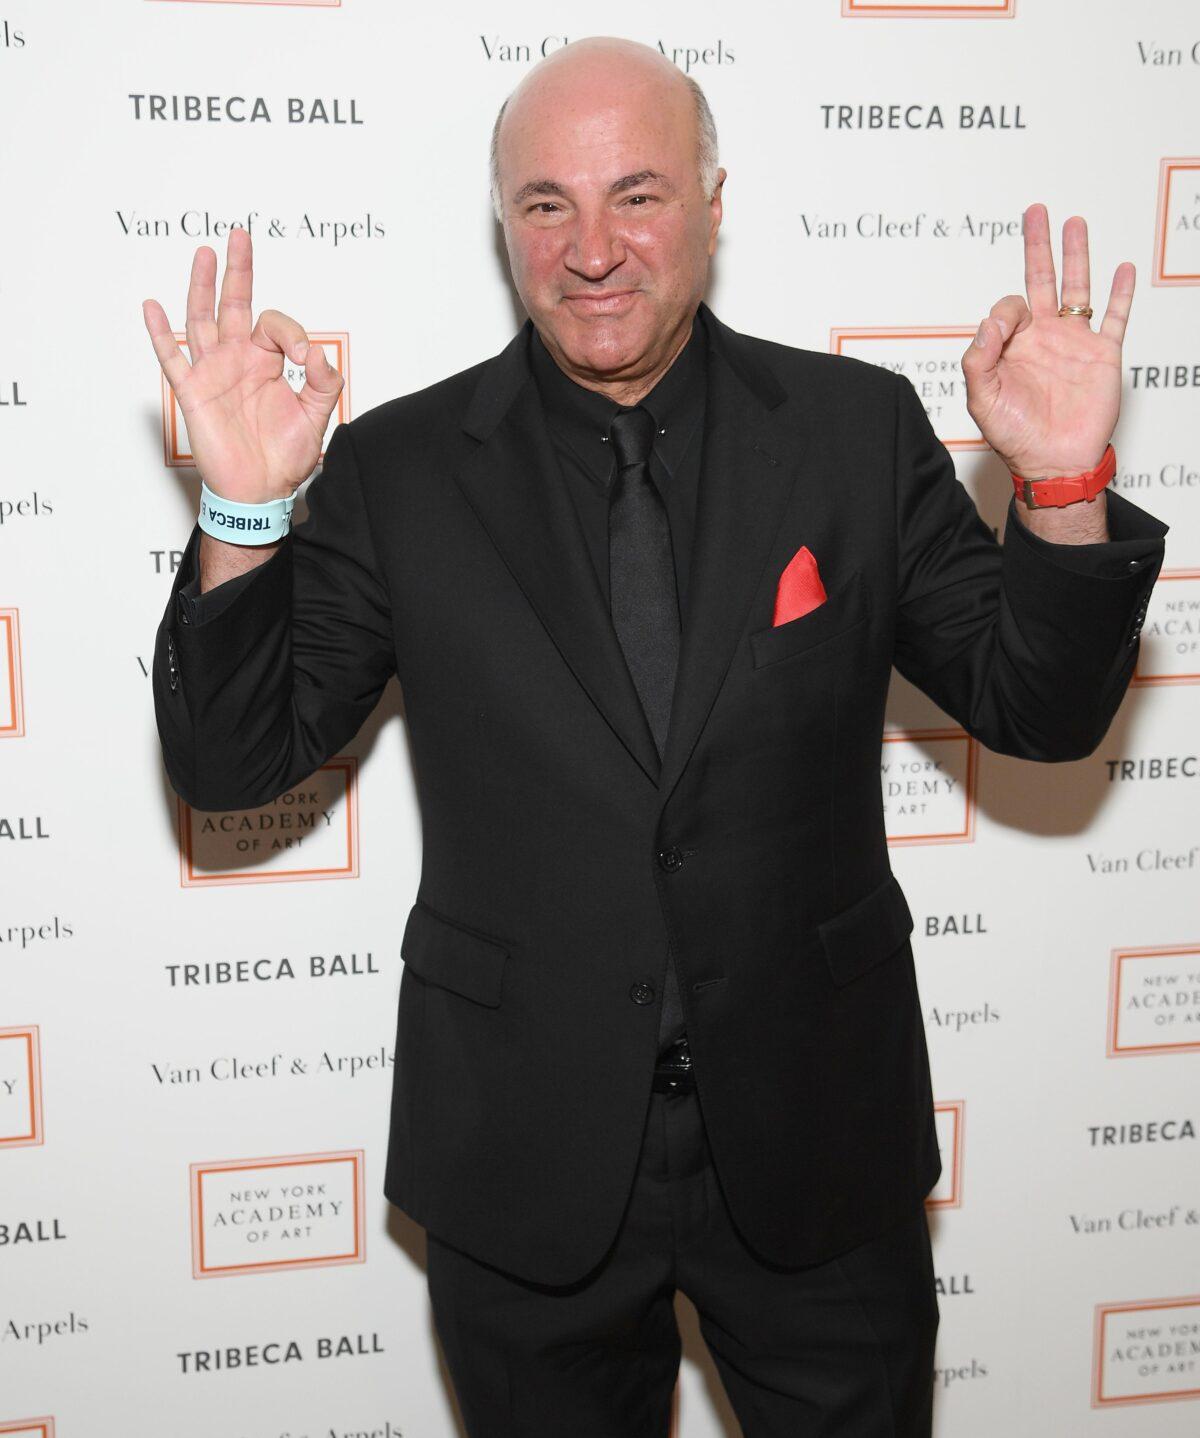 Kevin O'Leary attends the 2019 TriBeCa Ball at New York Academy of Art in New York City on April 8, 2019. (Dimitrios Kambouris/Getty Images)